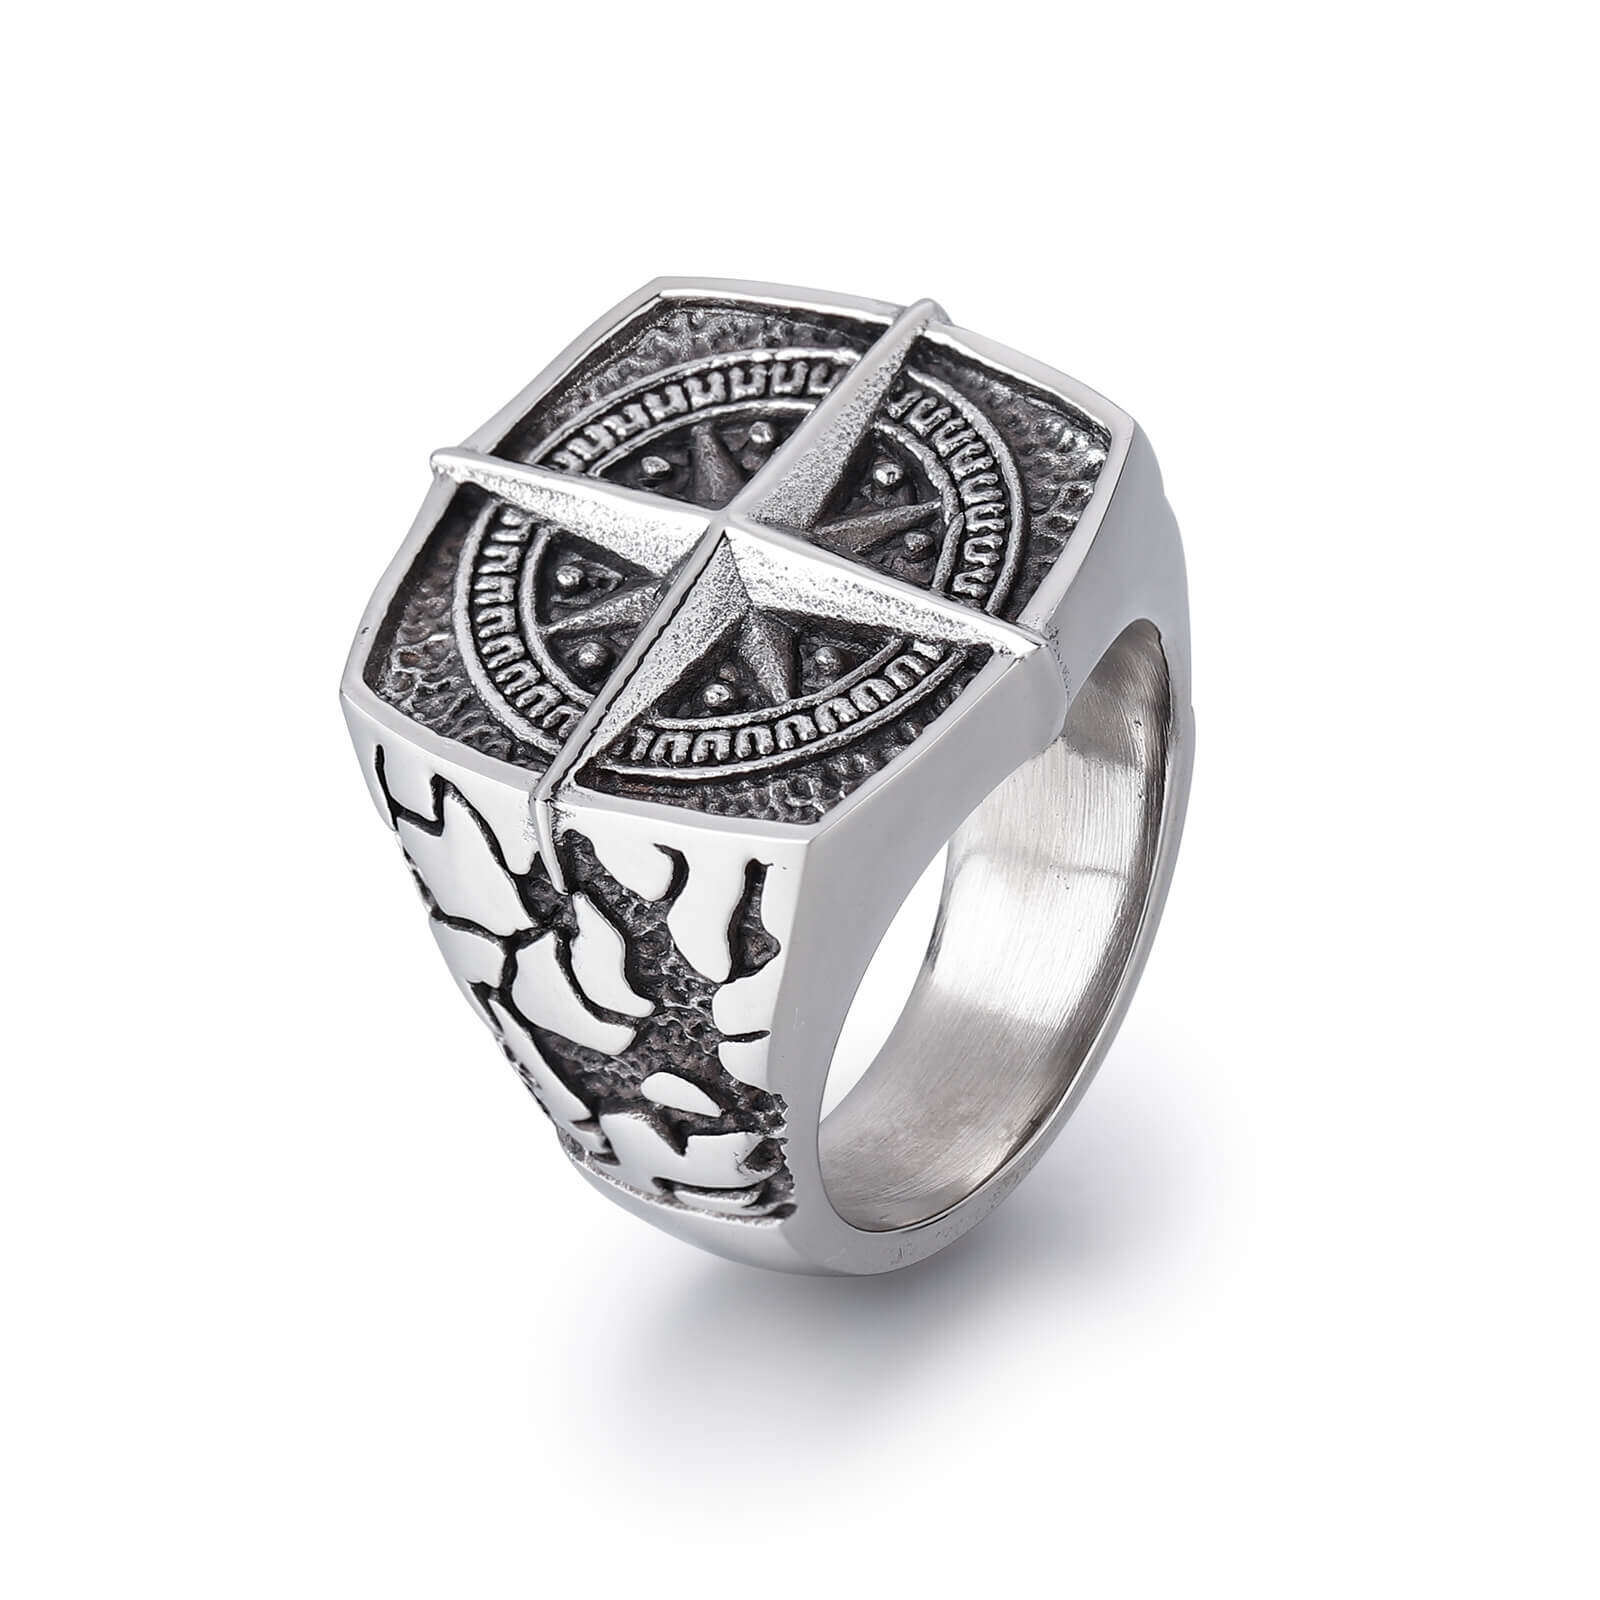 Fashion Men Navigation Jewelry Silver Stainless Steel Finger North Star Compass Ring For Men